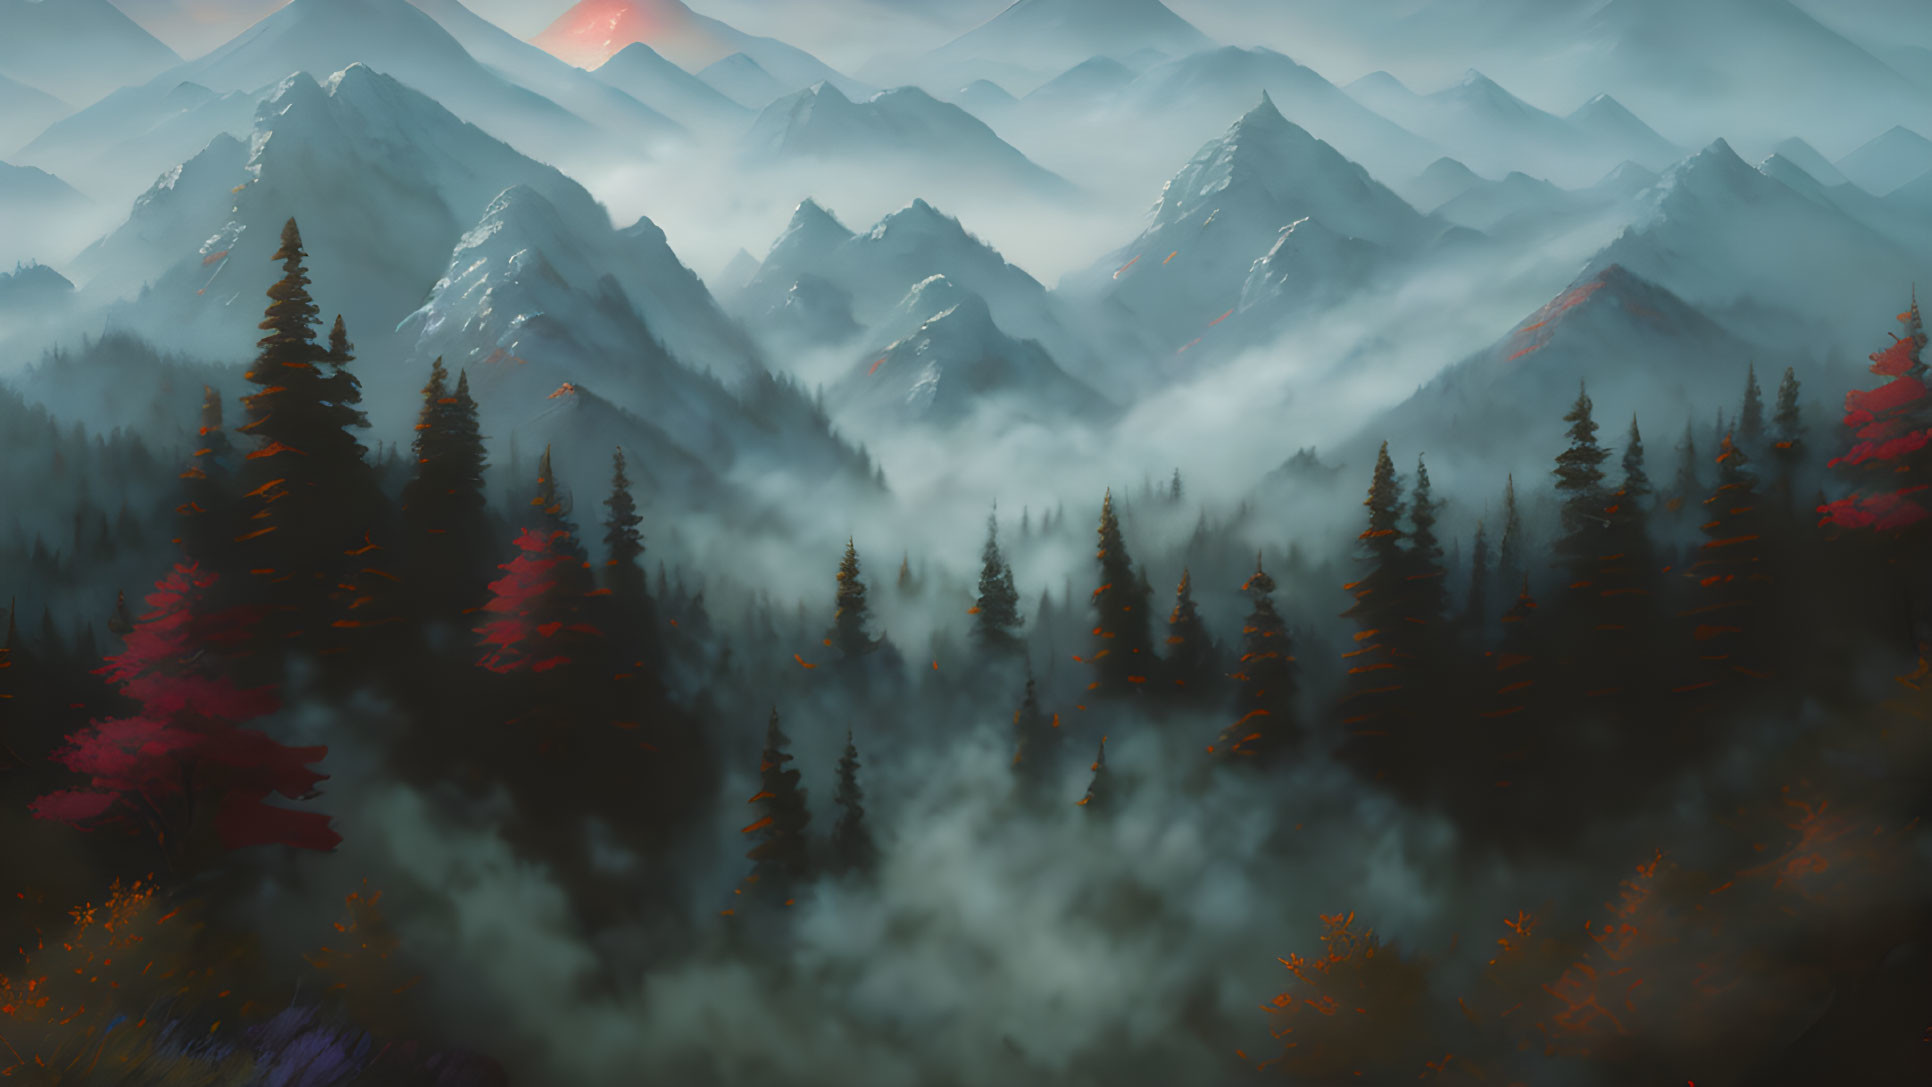 Misty mountains, autumn forest, and glowing sunrise landscape